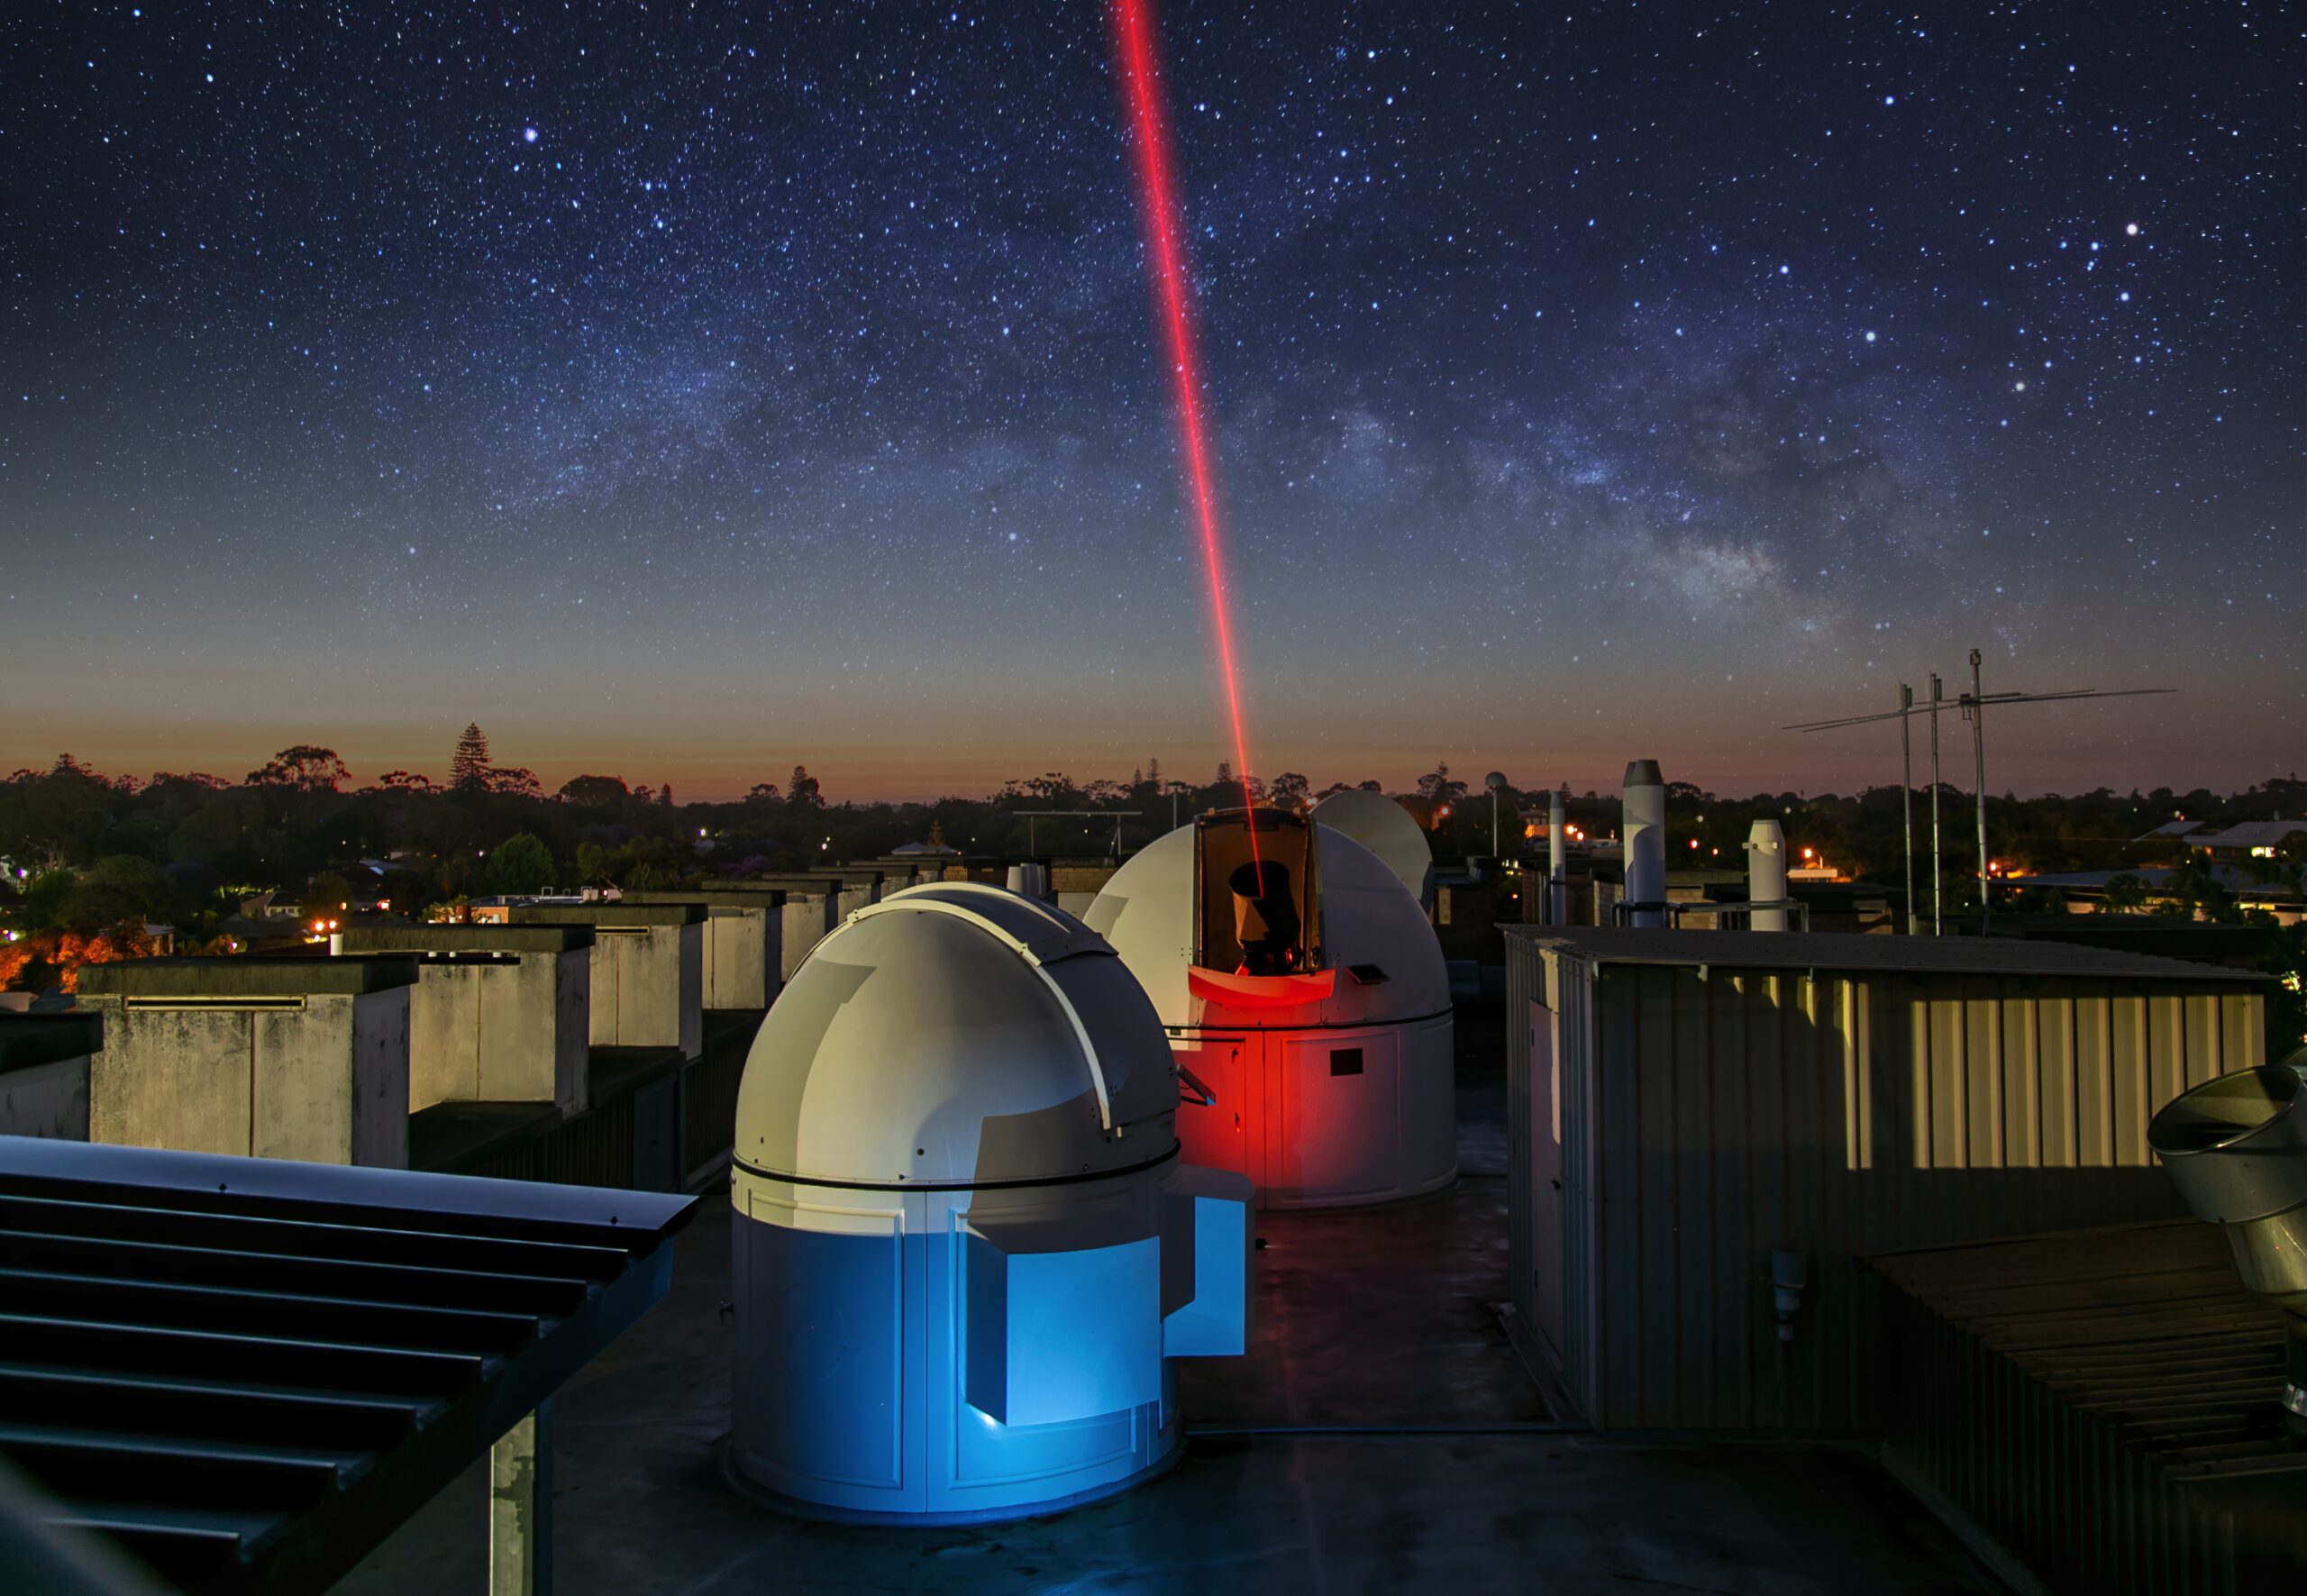 A red laser beam shines towards the sky out of an observatory dome on top of a building, with the Milky Way in the background